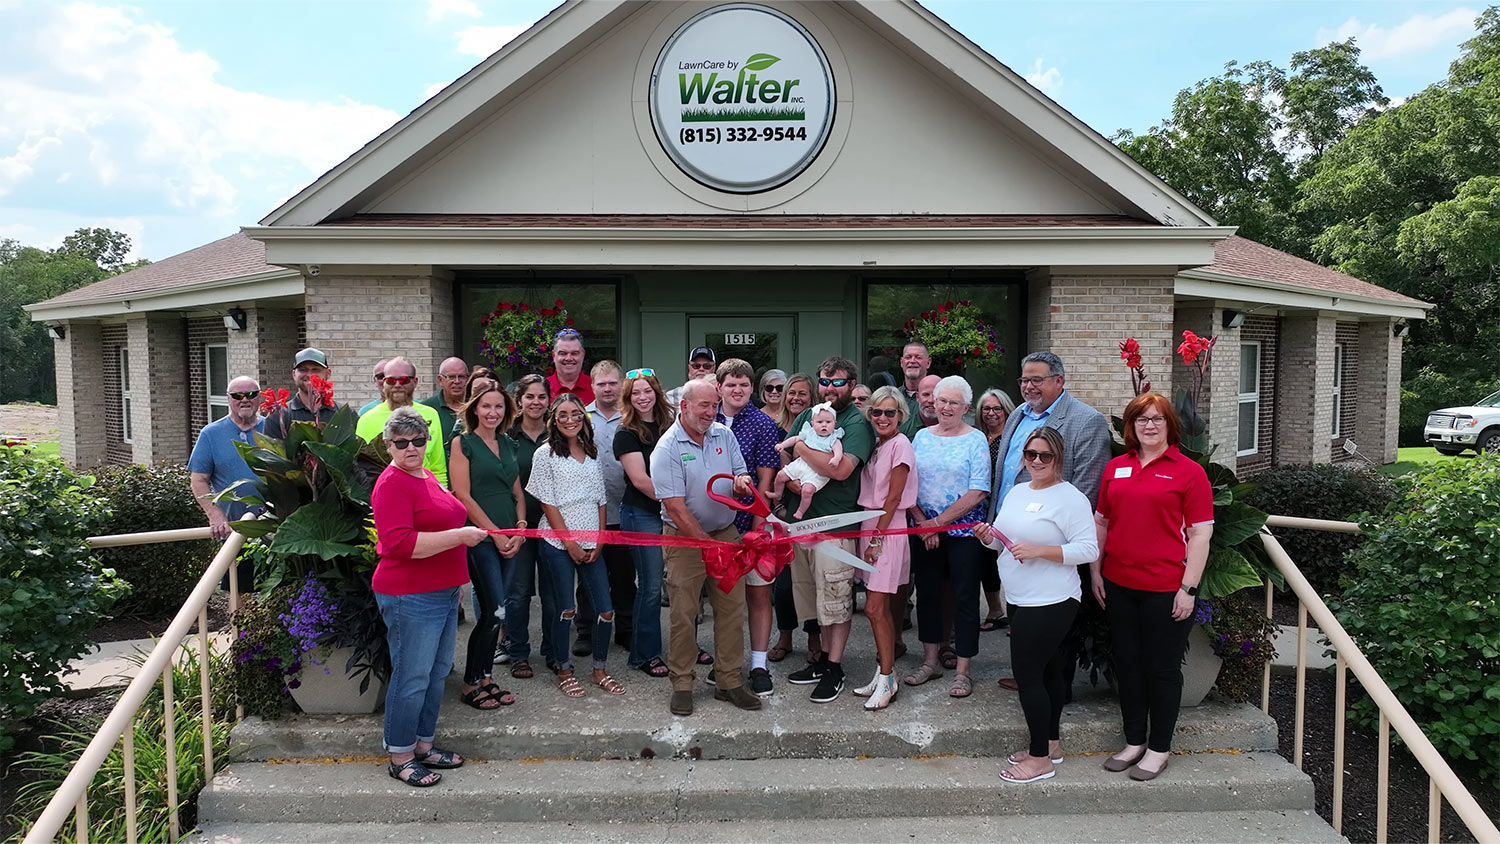 With the entire LawnCare by Walter team behind him, Mark Walter cuts the ribbon at 1515 Meridian Road in Rockford, Illinois.